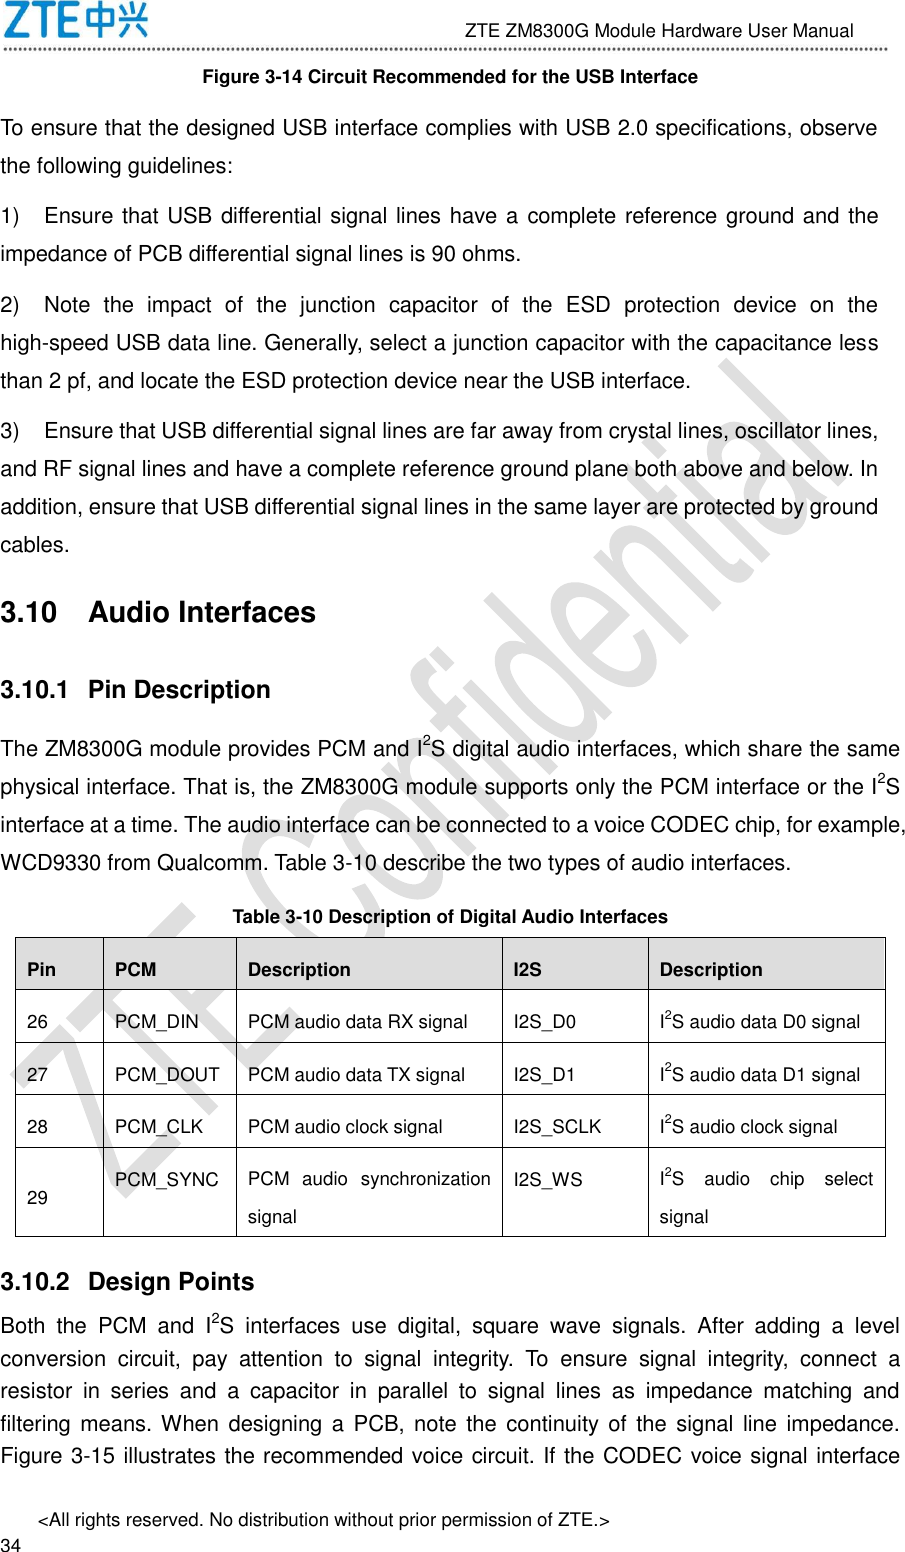                              ZTE ZM8300G Module Hardware User Manual &lt;All rights reserved. No distribution without prior permission of ZTE.&gt;                                                               34 Figure 3-14 Circuit Recommended for the USB Interface To ensure that the designed USB interface complies with USB 2.0 specifications, observe the following guidelines:   1)  Ensure that USB differential signal lines have a complete reference ground and the impedance of PCB differential signal lines is 90 ohms. 2)  Note  the  impact  of  the  junction  capacitor  of  the  ESD  protection  device  on  the high-speed USB data line. Generally, select a junction capacitor with the capacitance less than 2 pf, and locate the ESD protection device near the USB interface. 3)  Ensure that USB differential signal lines are far away from crystal lines, oscillator lines, and RF signal lines and have a complete reference ground plane both above and below. In addition, ensure that USB differential signal lines in the same layer are protected by ground cables. 3.10  Audio Interfaces 3.10.1  Pin Description The ZM8300G module provides PCM and I2S digital audio interfaces, which share the same physical interface. That is, the ZM8300G module supports only the PCM interface or the I2S interface at a time. The audio interface can be connected to a voice CODEC chip, for example, WCD9330 from Qualcomm. Table 3-10 describe the two types of audio interfaces. Table 3-10 Description of Digital Audio Interfaces Pin PCM Description I2S Description 26 PCM_DIN PCM audio data RX signal I2S_D0 I2S audio data D0 signal 27 PCM_DOUT PCM audio data TX signal I2S_D1 I2S audio data D1 signal 28 PCM_CLK PCM audio clock signal I2S_SCLK I2S audio clock signal 29 PCM_SYNC PCM  audio  synchronization signal I2S_WS I2S  audio  chip  select signal 3.10.2  Design Points Both  the  PCM  and  I2S  interfaces  use  digital,  square  wave  signals.  After  adding  a  level conversion  circuit,  pay  attention  to  signal  integrity.  To  ensure  signal  integrity,  connect  a resistor  in  series  and  a  capacitor  in  parallel  to  signal  lines  as  impedance  matching  and filtering means. When  designing a  PCB, note  the continuity of  the signal line  impedance. Figure 3-15 illustrates the recommended voice circuit. If the CODEC voice signal interface 